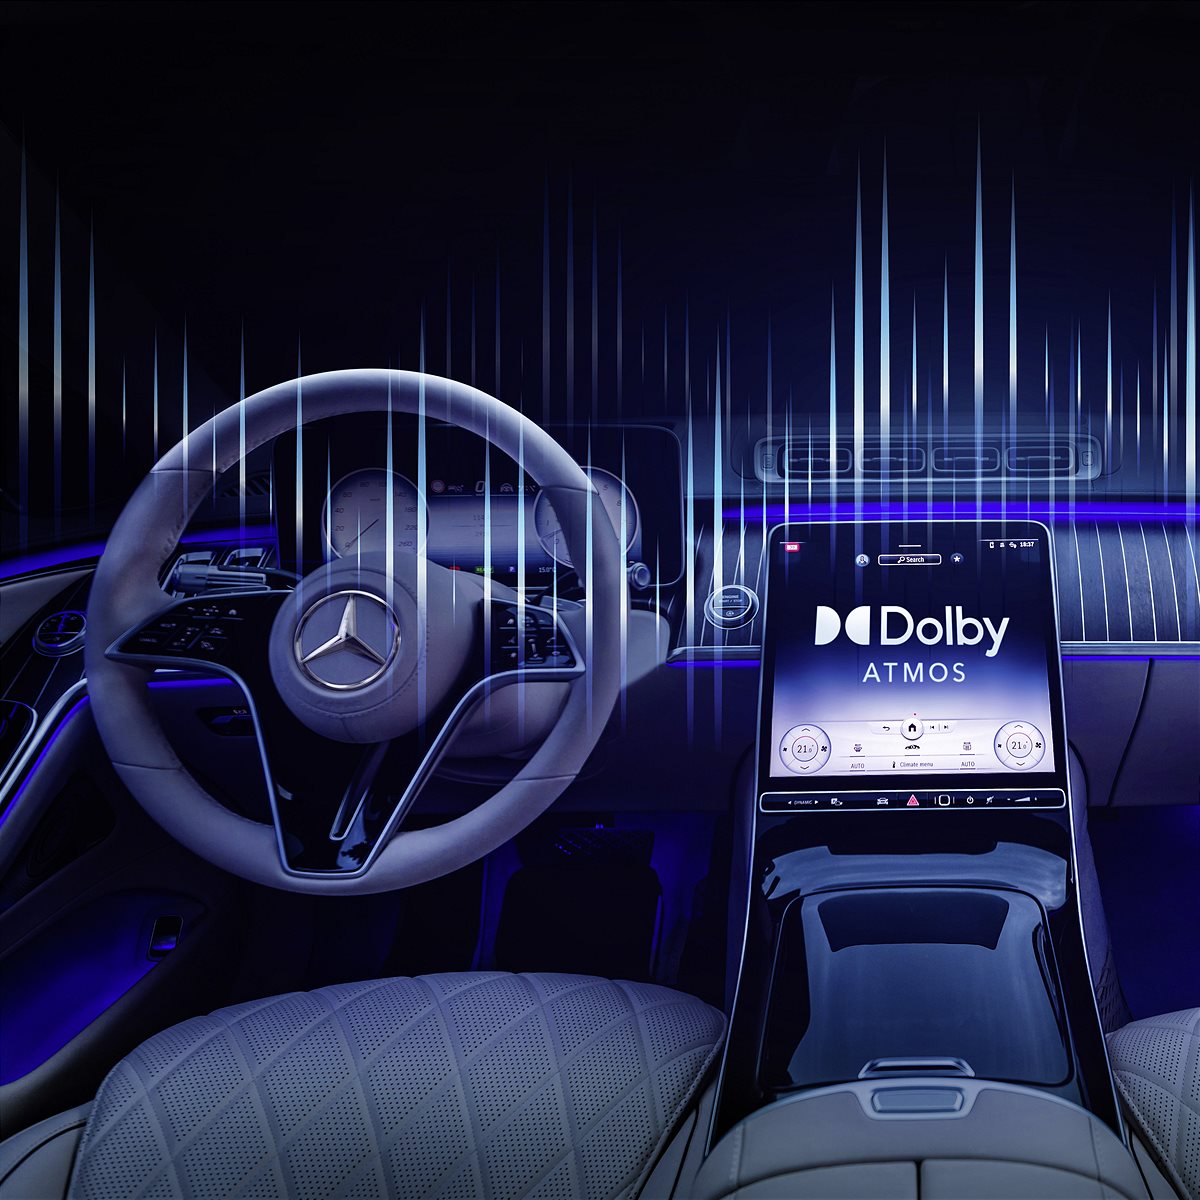 Mercedes-Benz Dolby Atmos